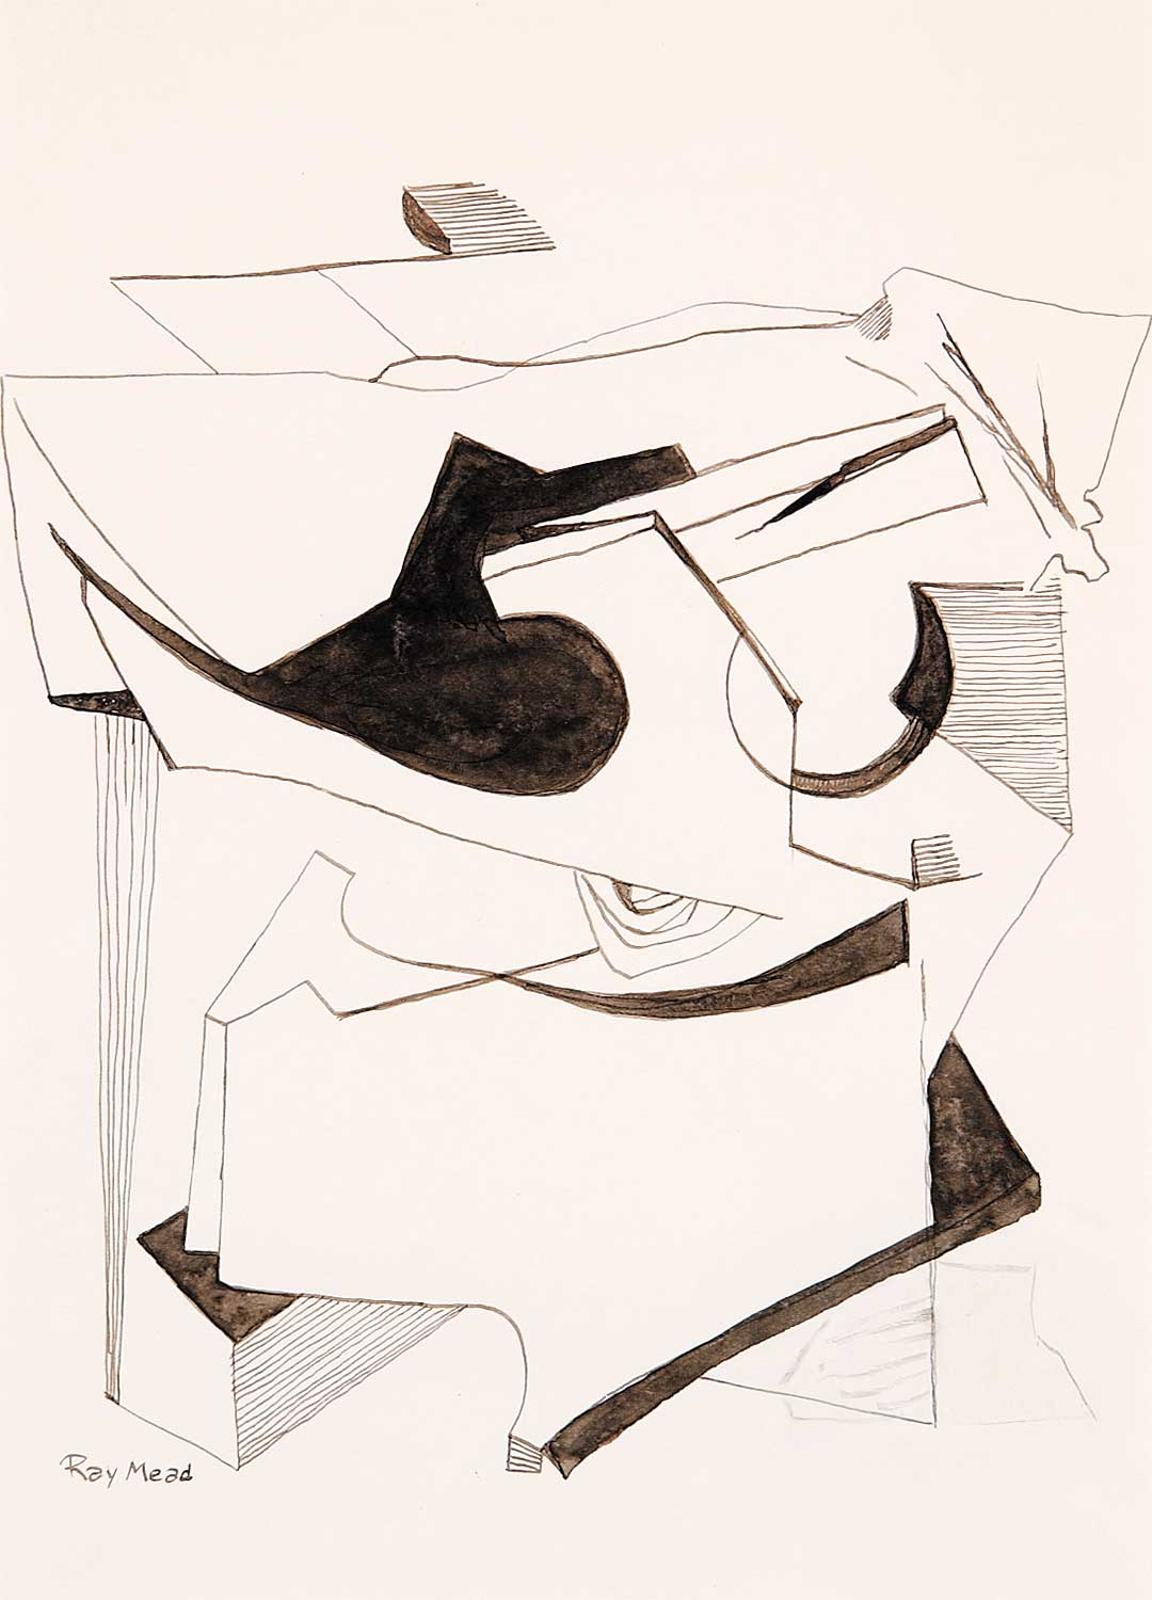 Raymond John Mead (1921-1998) - Untitled - Abstract Forms